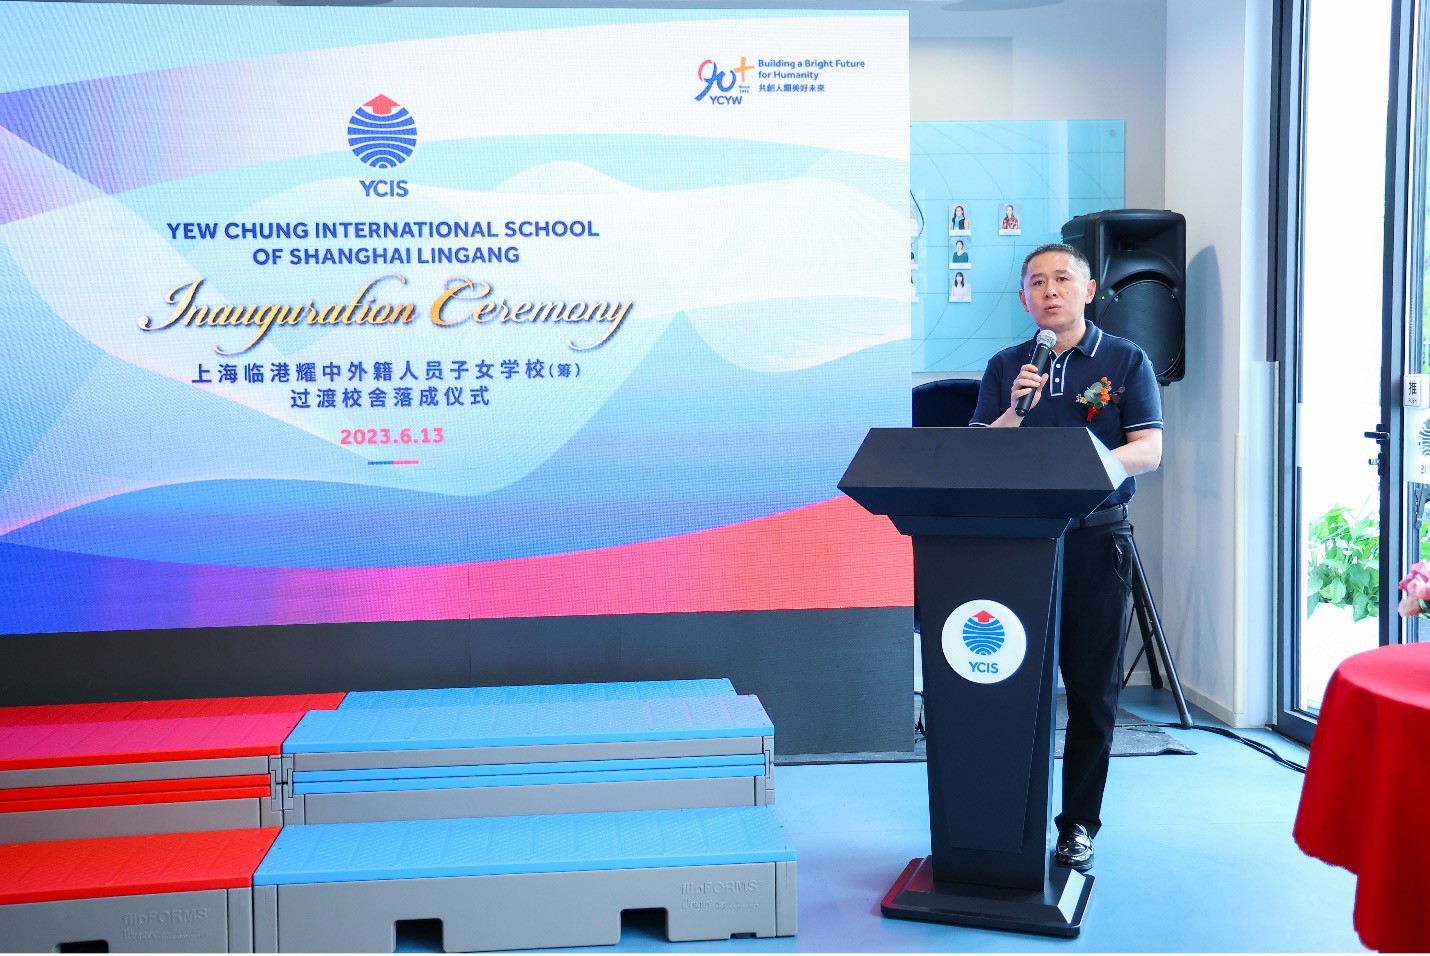 Mr Ting Miao, Deputy Director of Lingang Special Area Administration, extended his congratulations on the inauguration of YCIS Shanghai Lingang temporary campus 